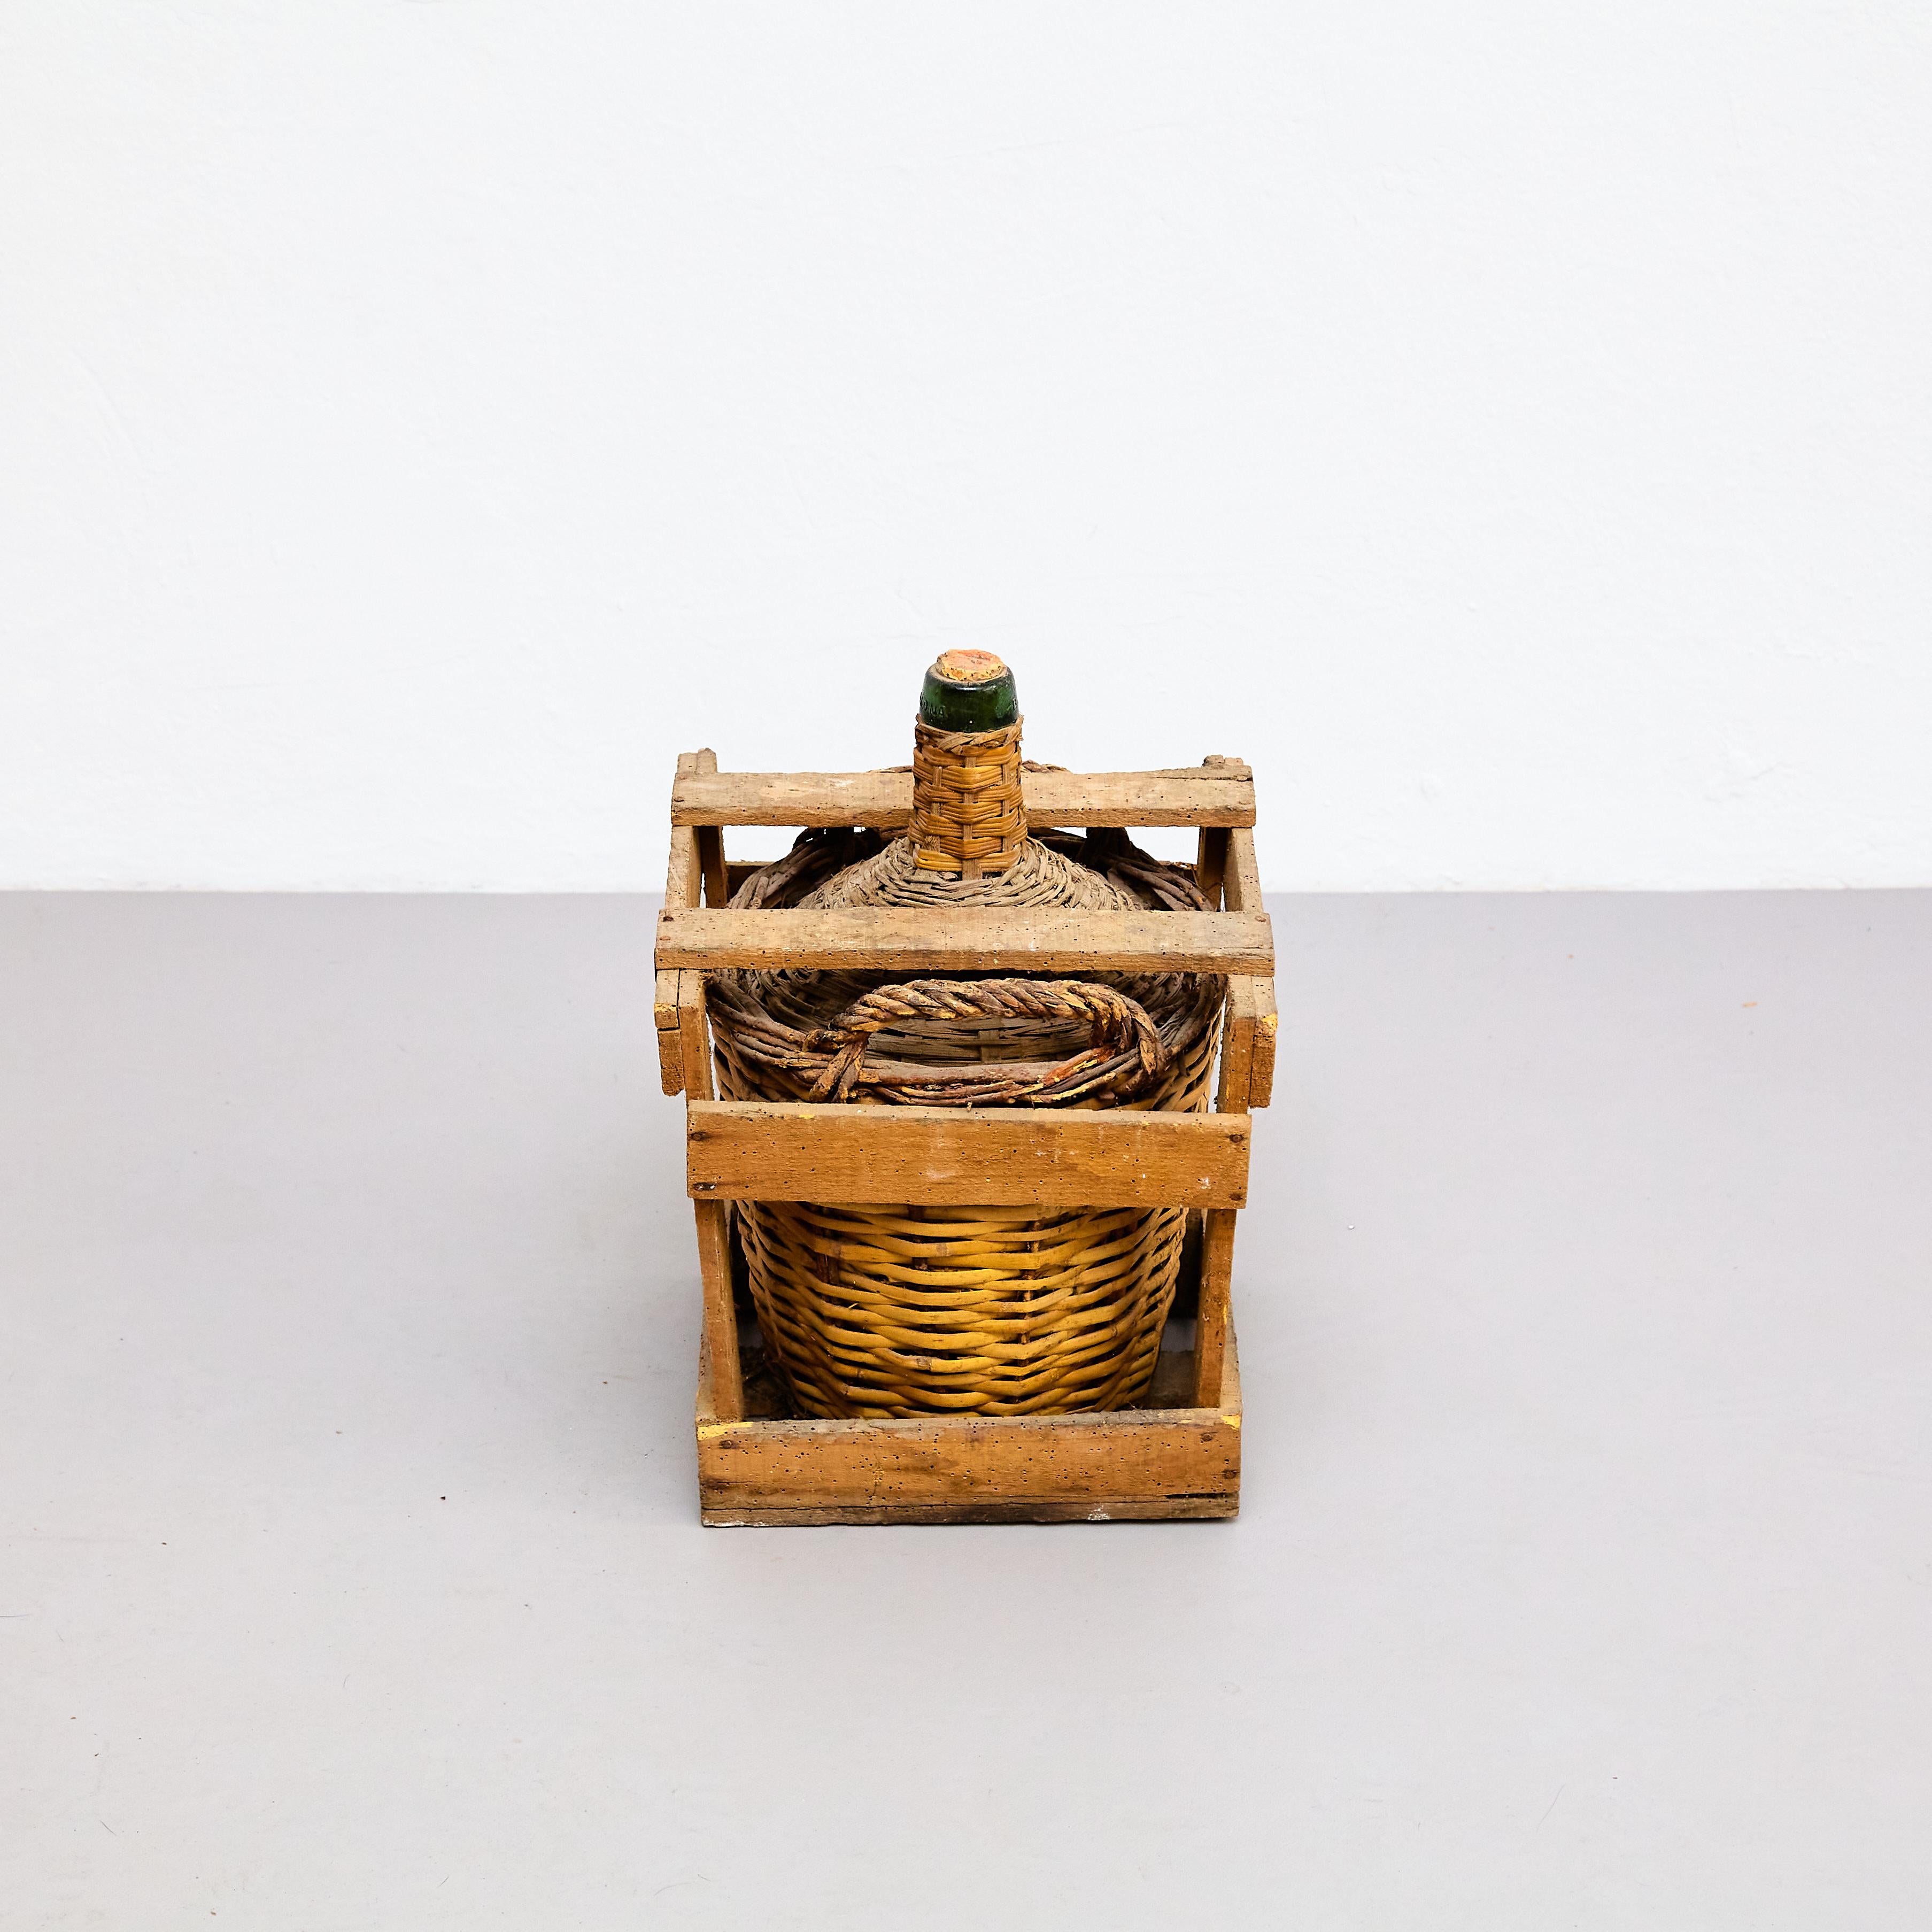 Mid-20th Century Antique Glass Bottle Vase with Wicker Basket, circa 1960 For Sale